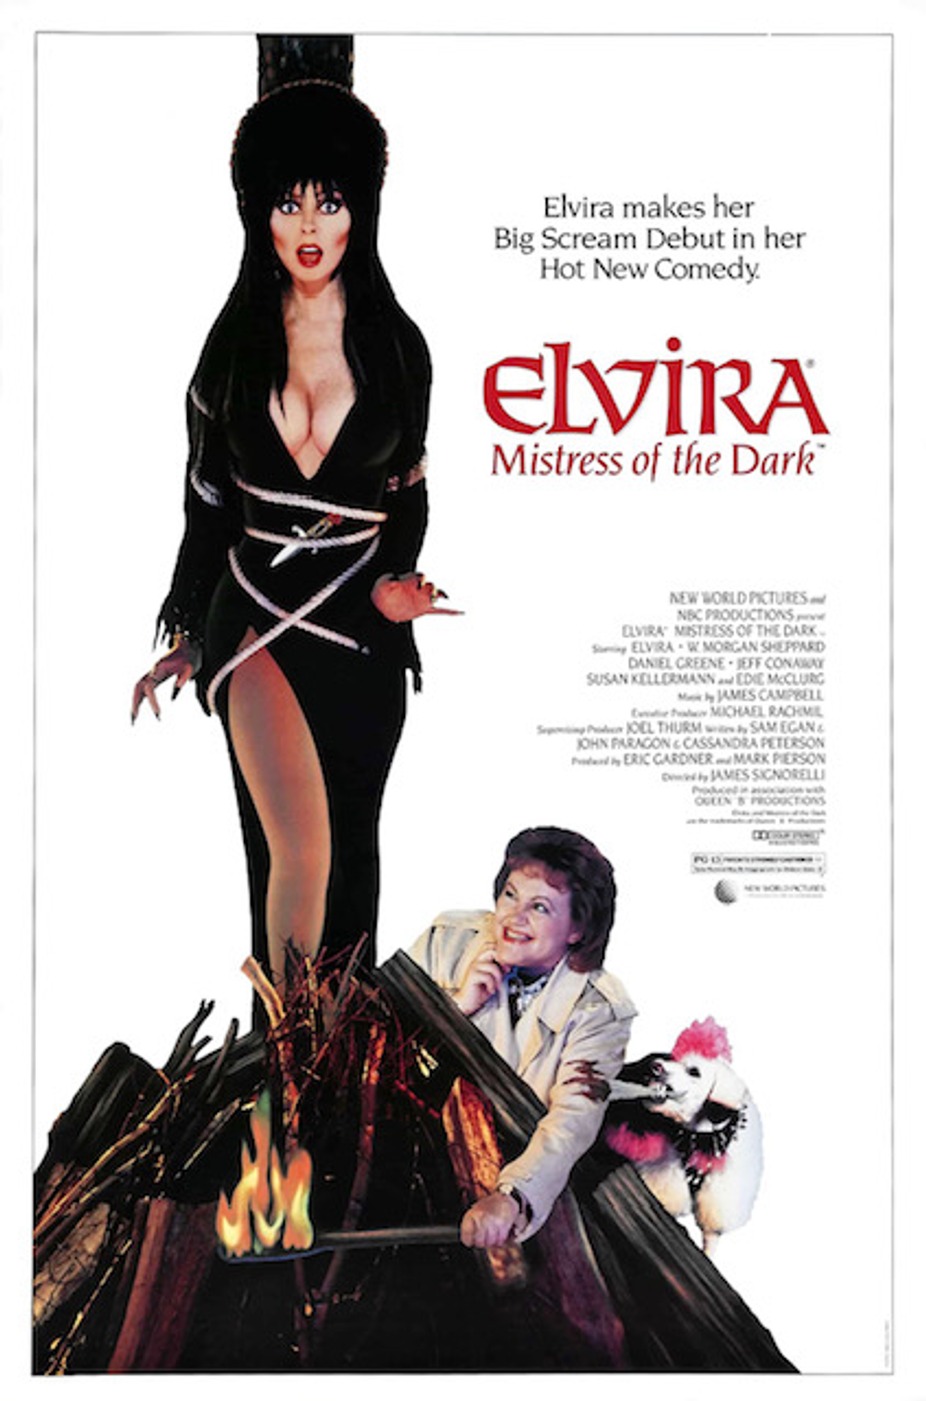 Elvira Mistress of the Dark at the Drive-In event photo